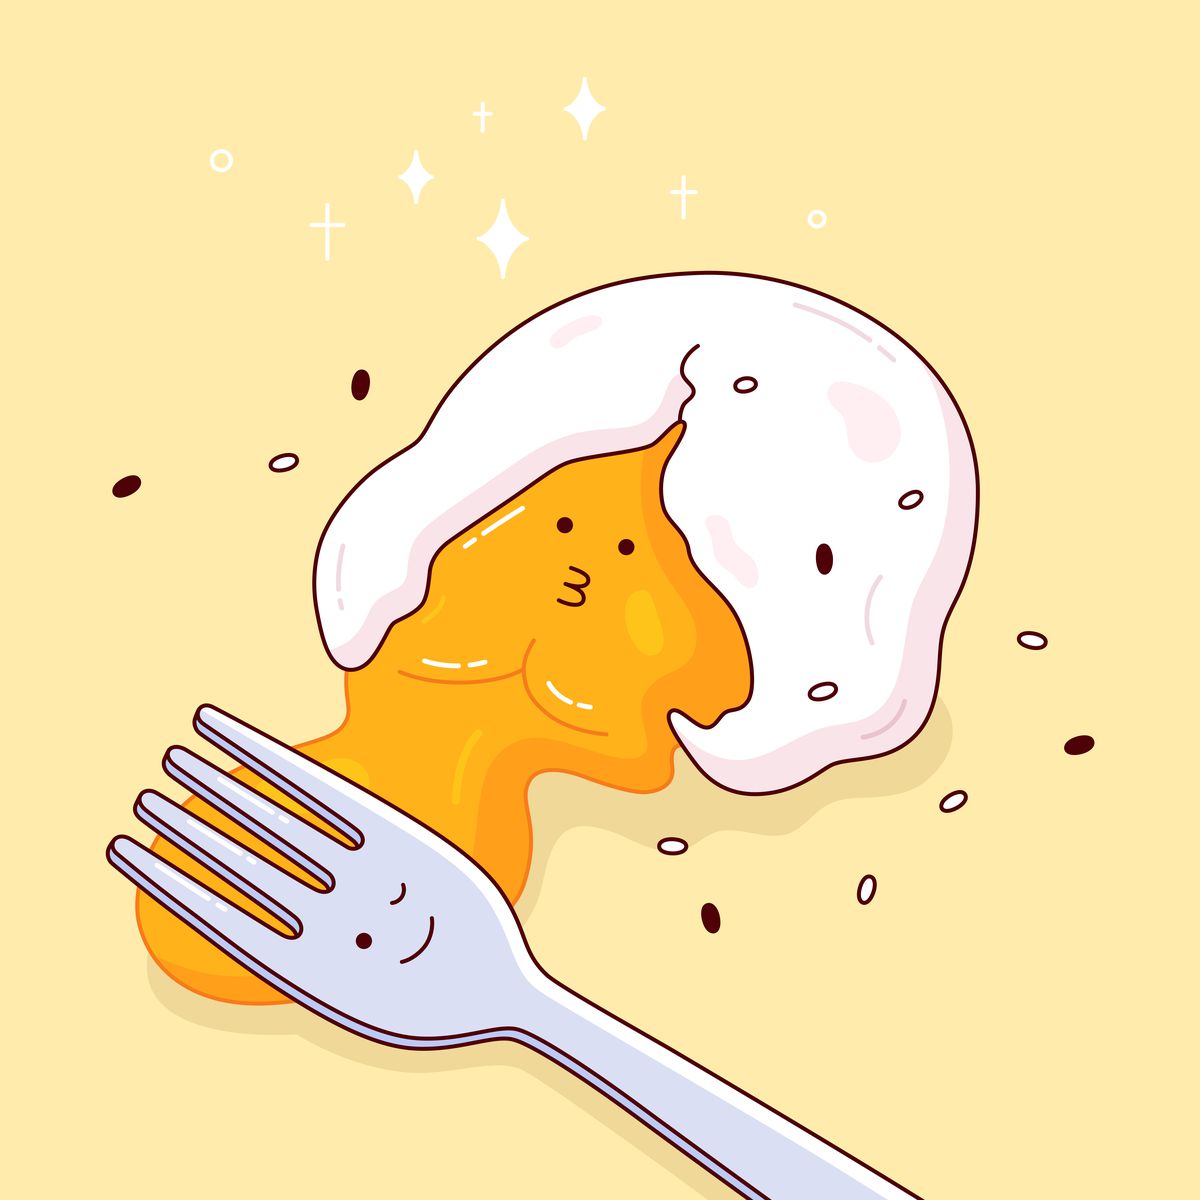 A smiling jammy egg broken open with a fork, its yolk spreading across the plate. Illustration.